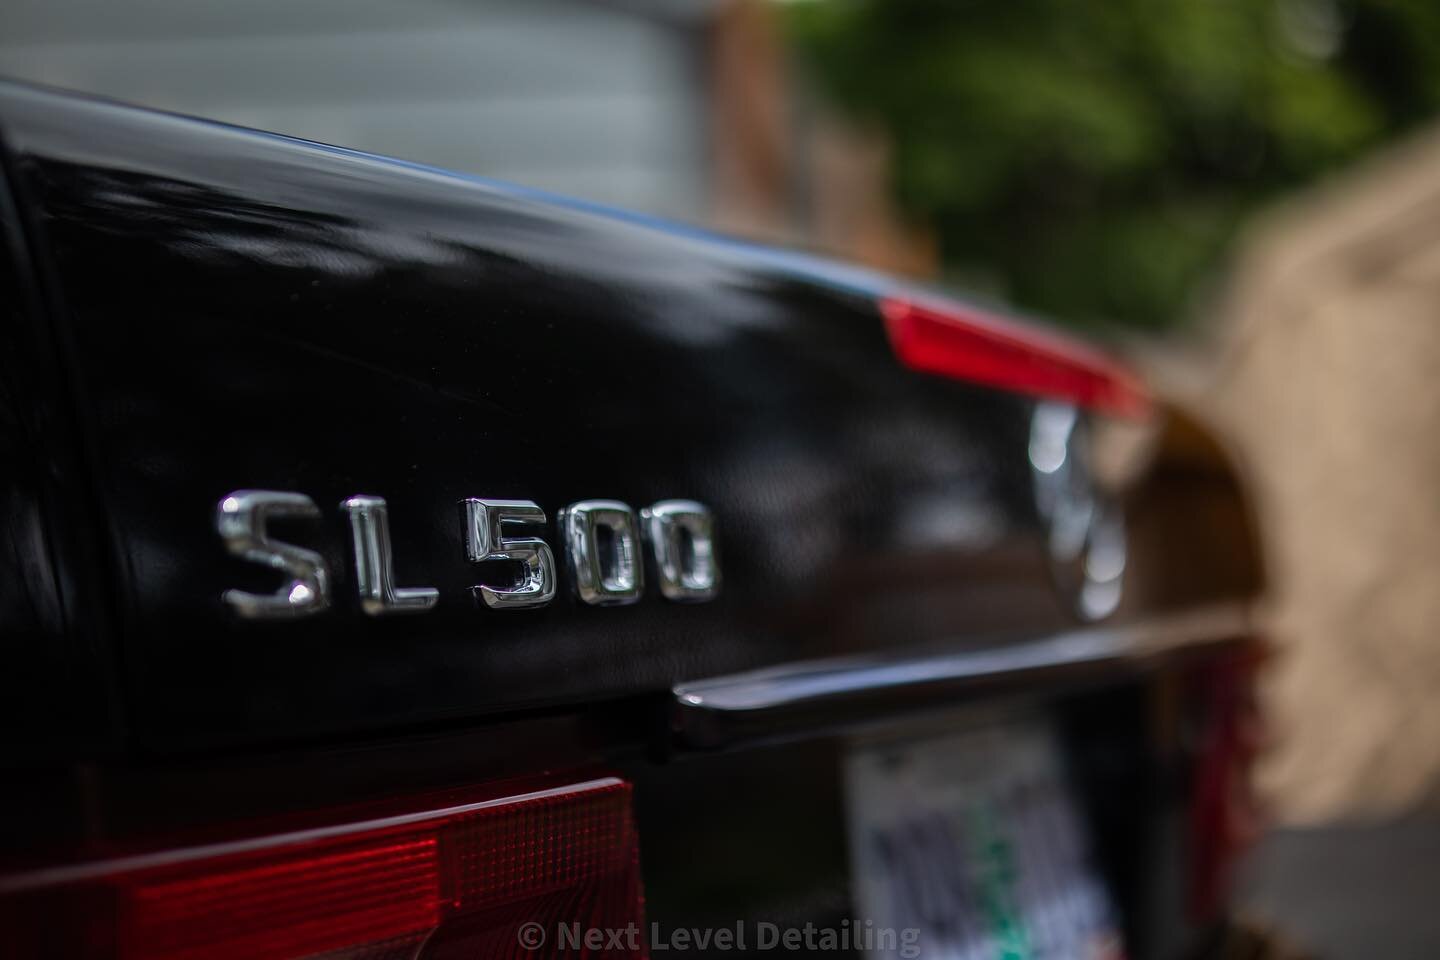 SL 500 

Came in for an Exterior Detail and Interior Detail.

Owner : @sunwoops 
&bull;
&bull;
&bull;
&bull;
#mercedes #german #luxury #hashtag #black #mercedesbenz #car #cars #carporn #carsofinstagram #cargram #photography #photo #photooftheday #pic